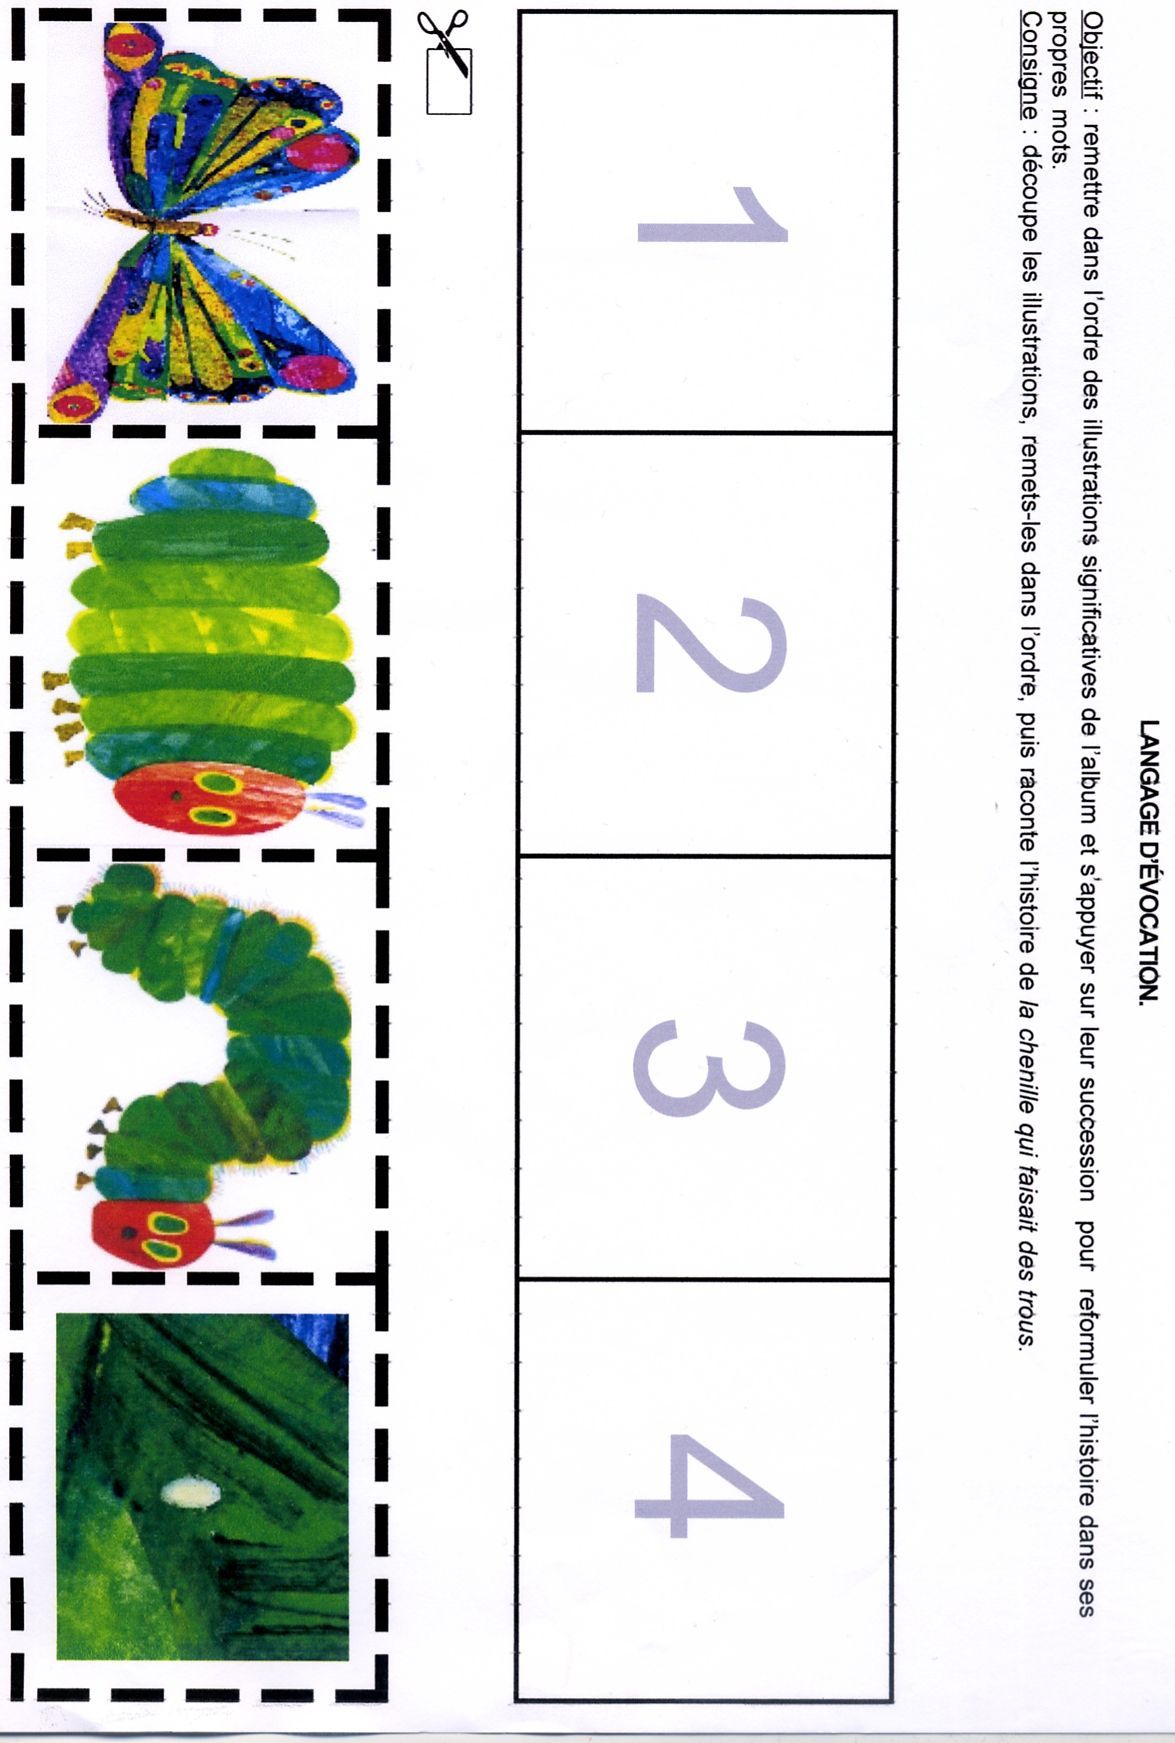 The very hungry caterpillar stages of life hands-on activity